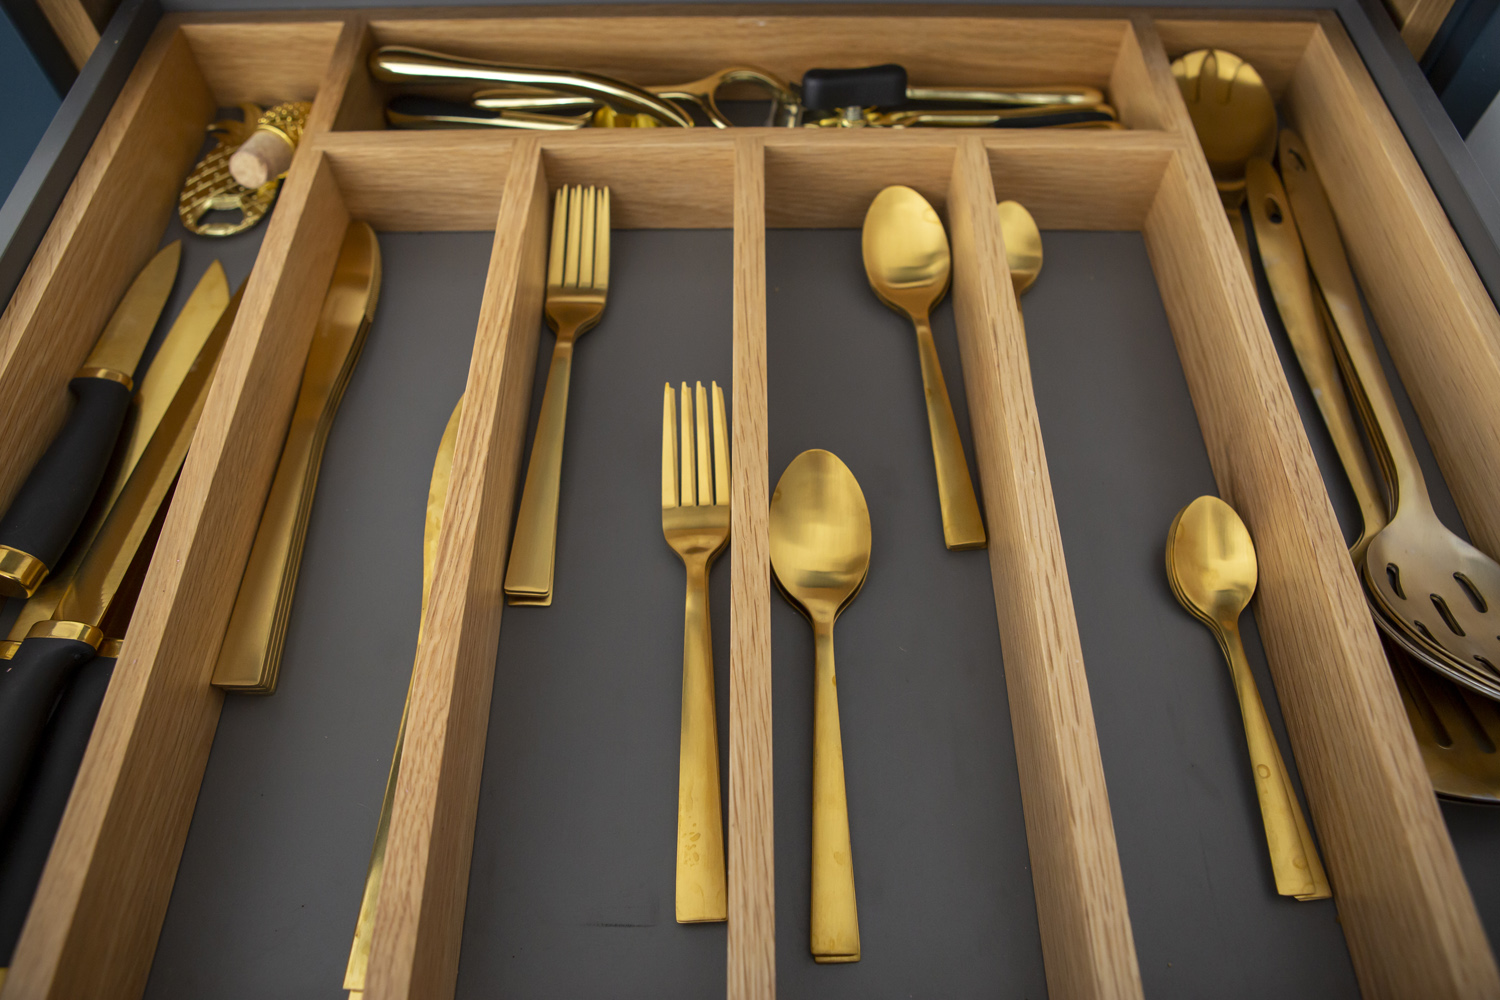 Aesthetic kitchen drawer with oak detail and gold cutlery